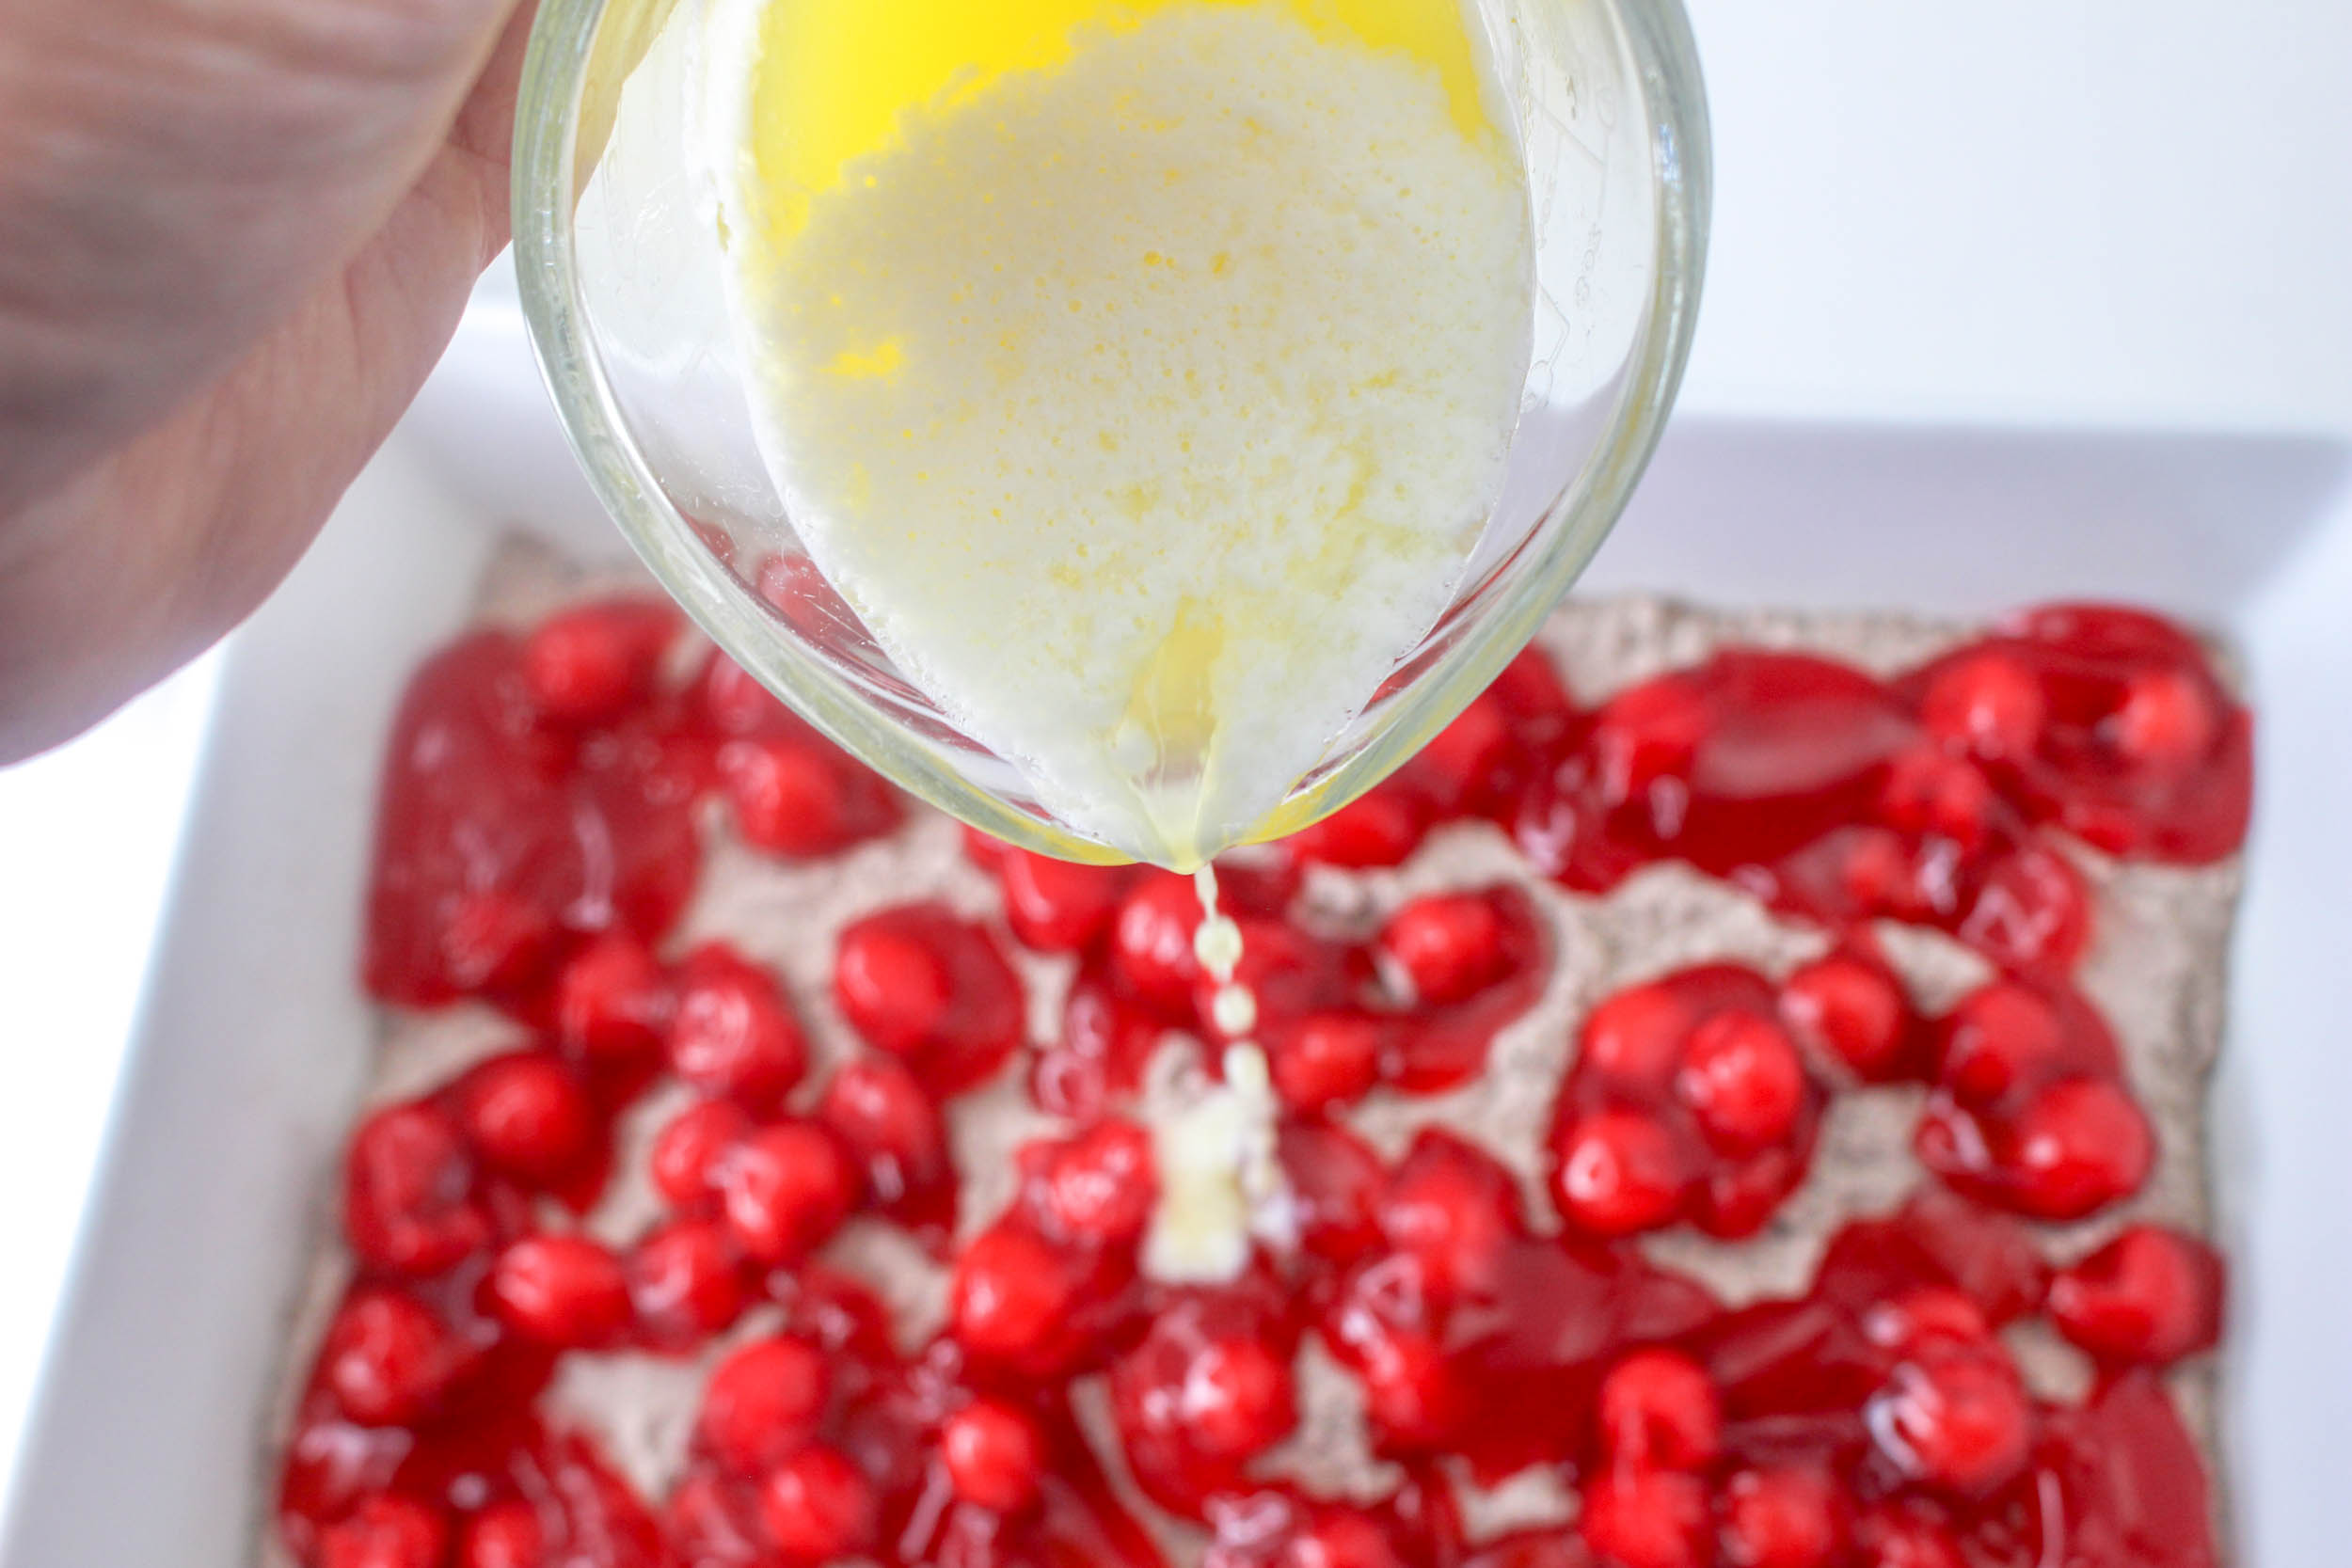 A person pouring an egg into a bowl of cherries.